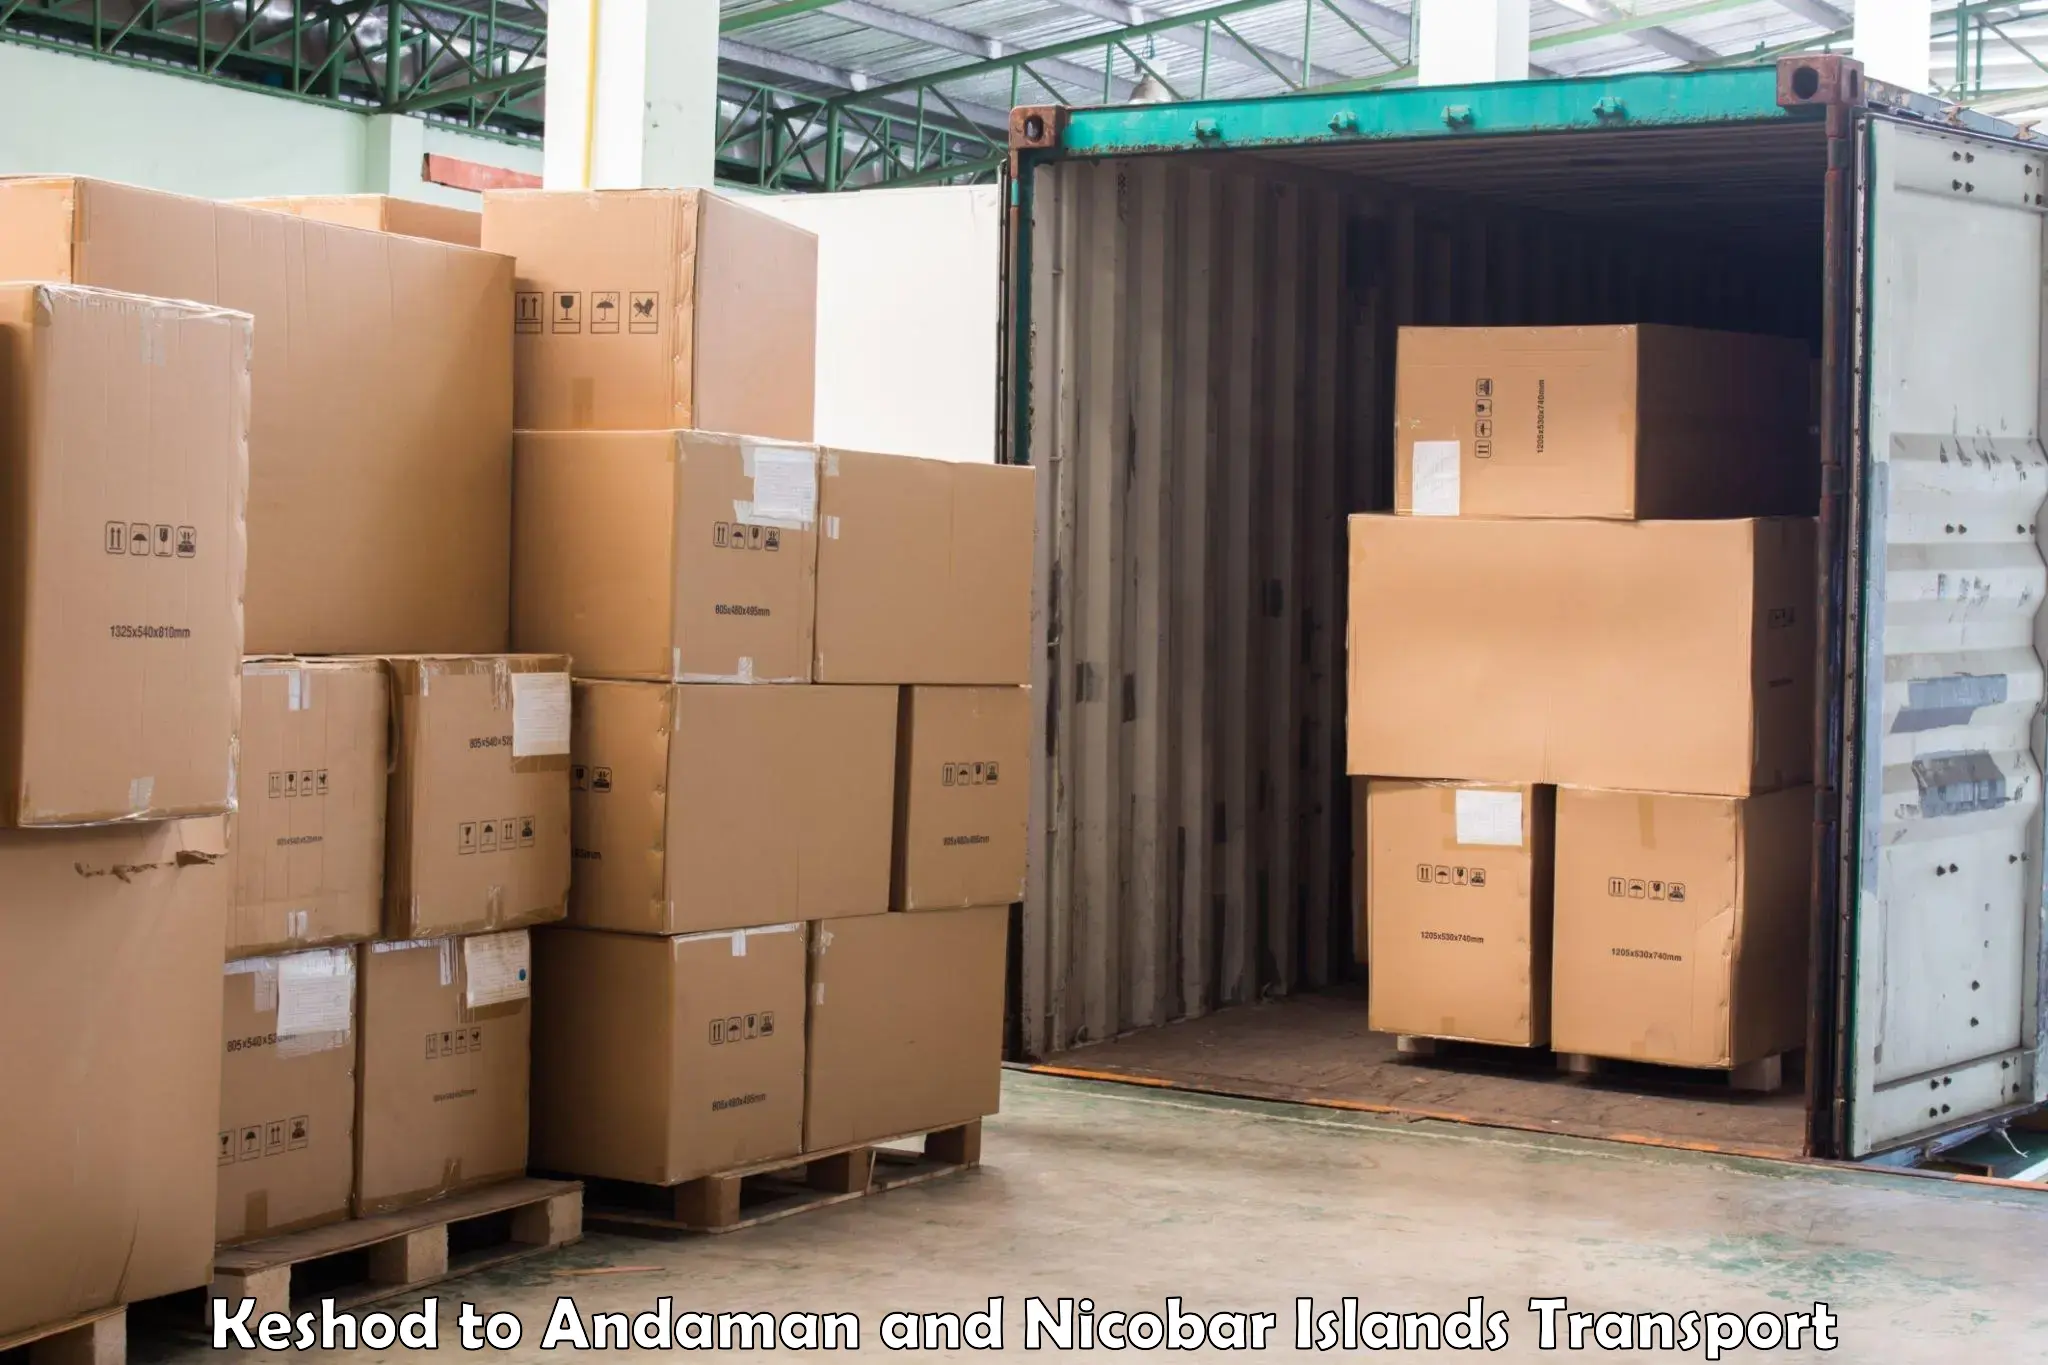 Lorry transport service in Keshod to Andaman and Nicobar Islands